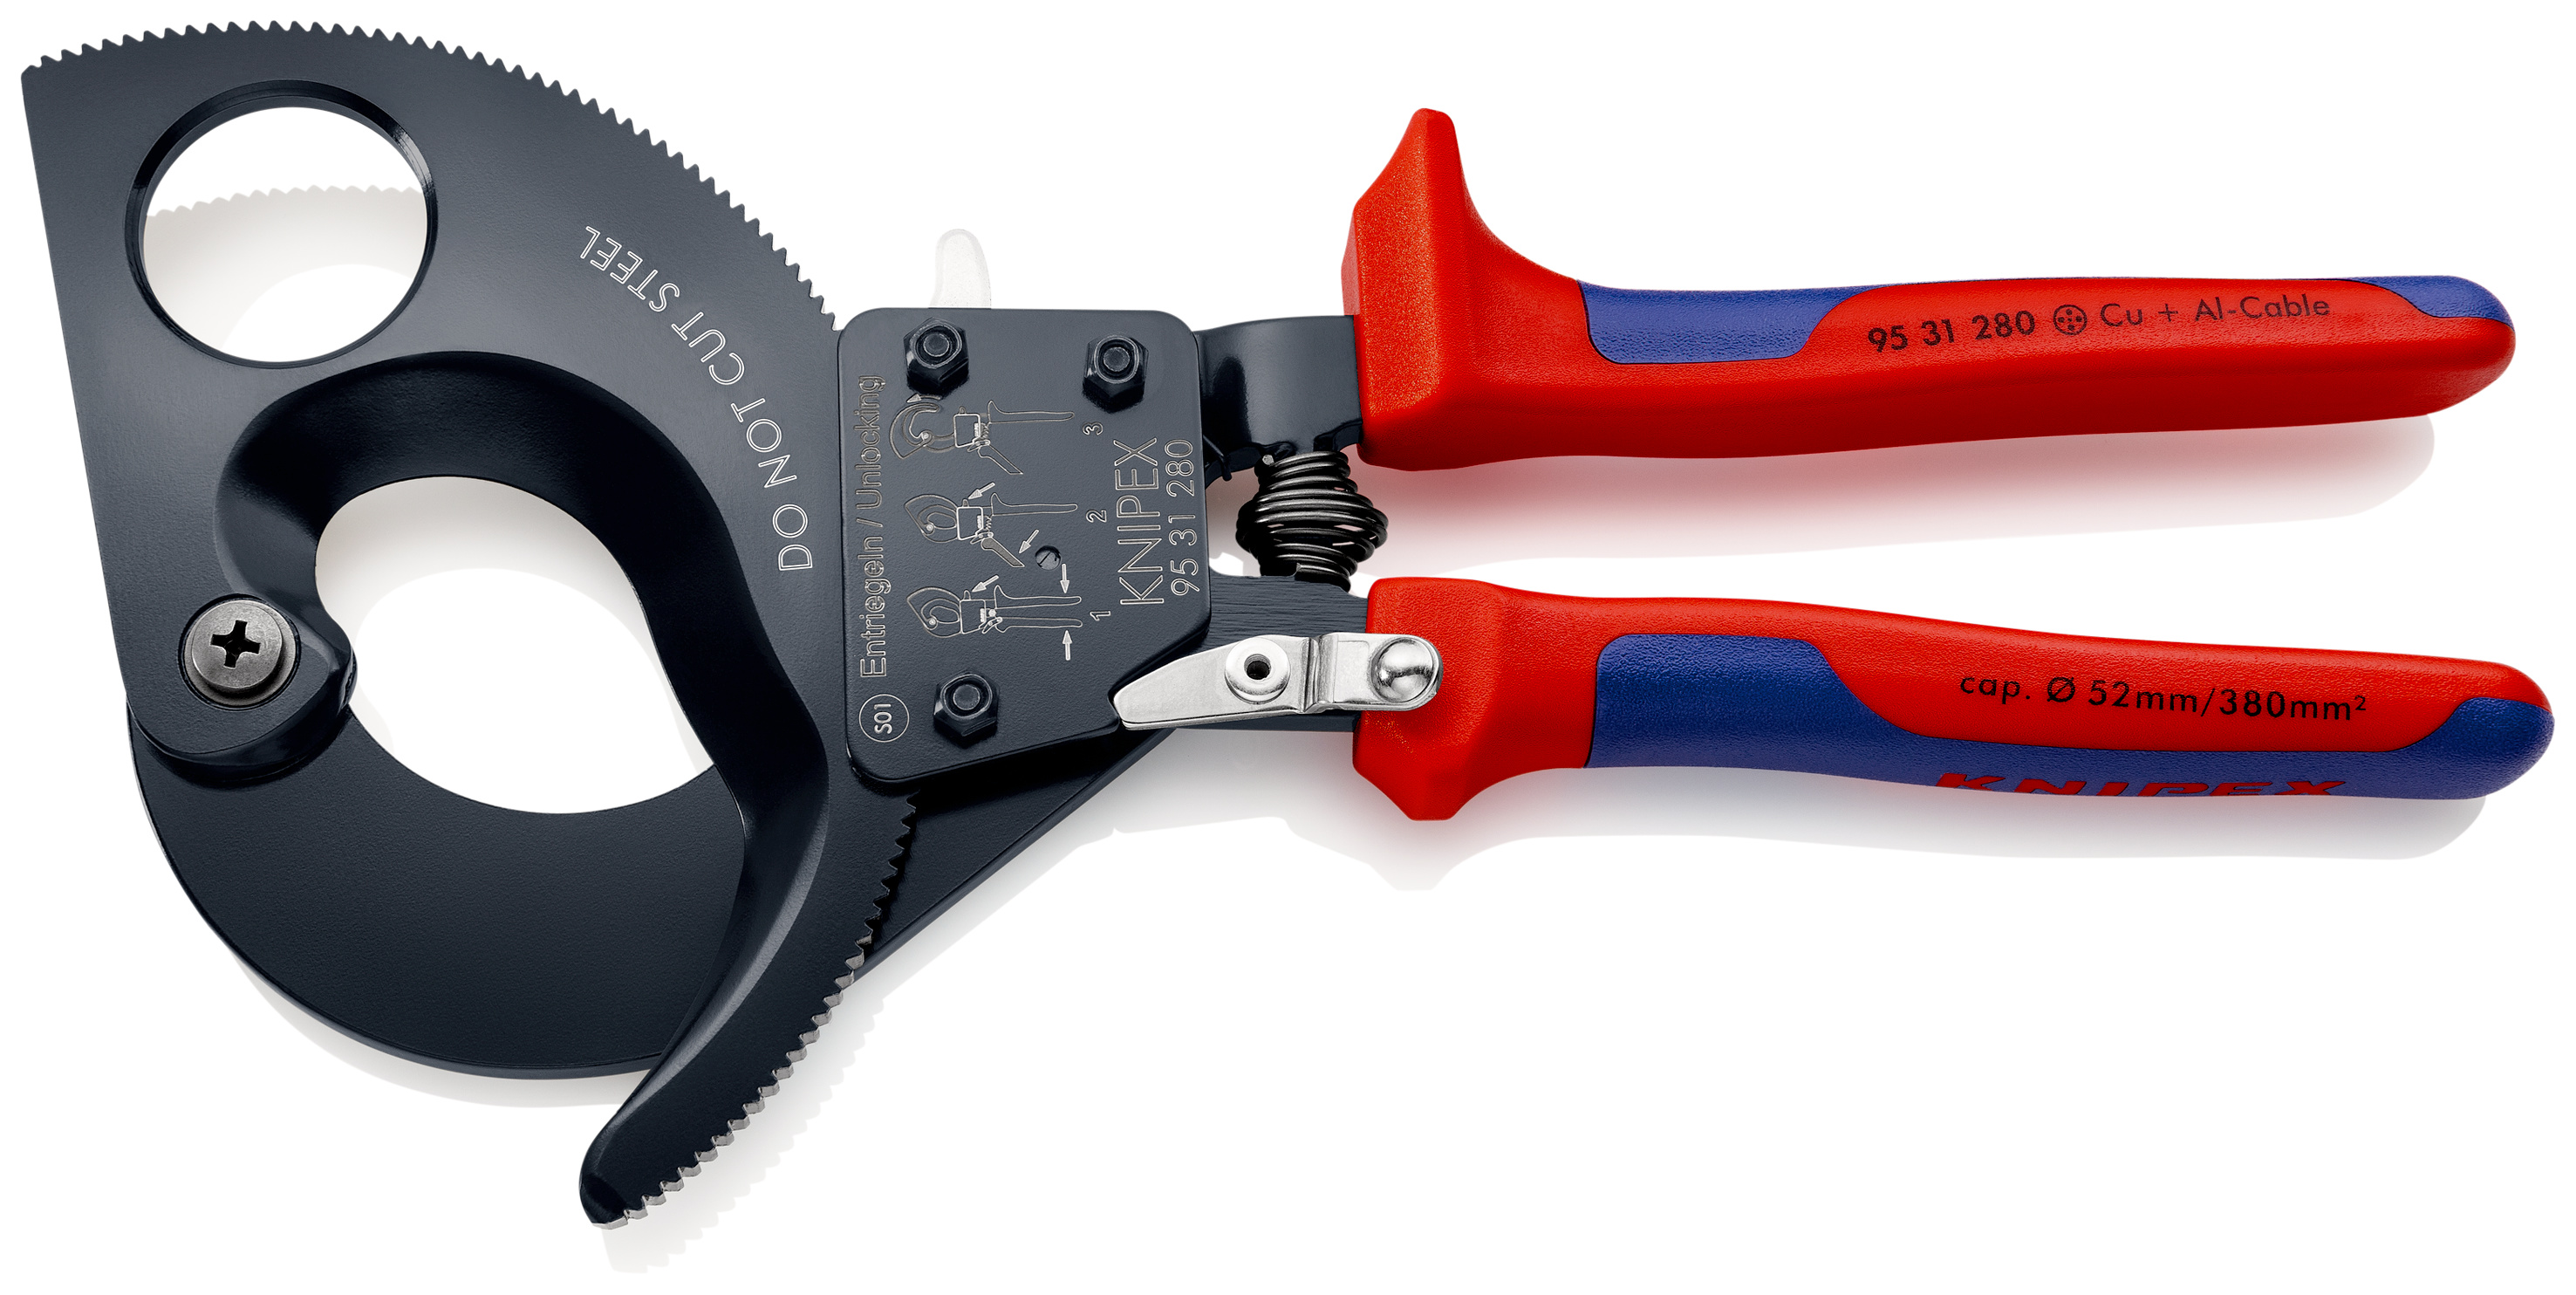 Knipex Insulated 2" Capacity Ratchet Action Cable Cutters 21586 